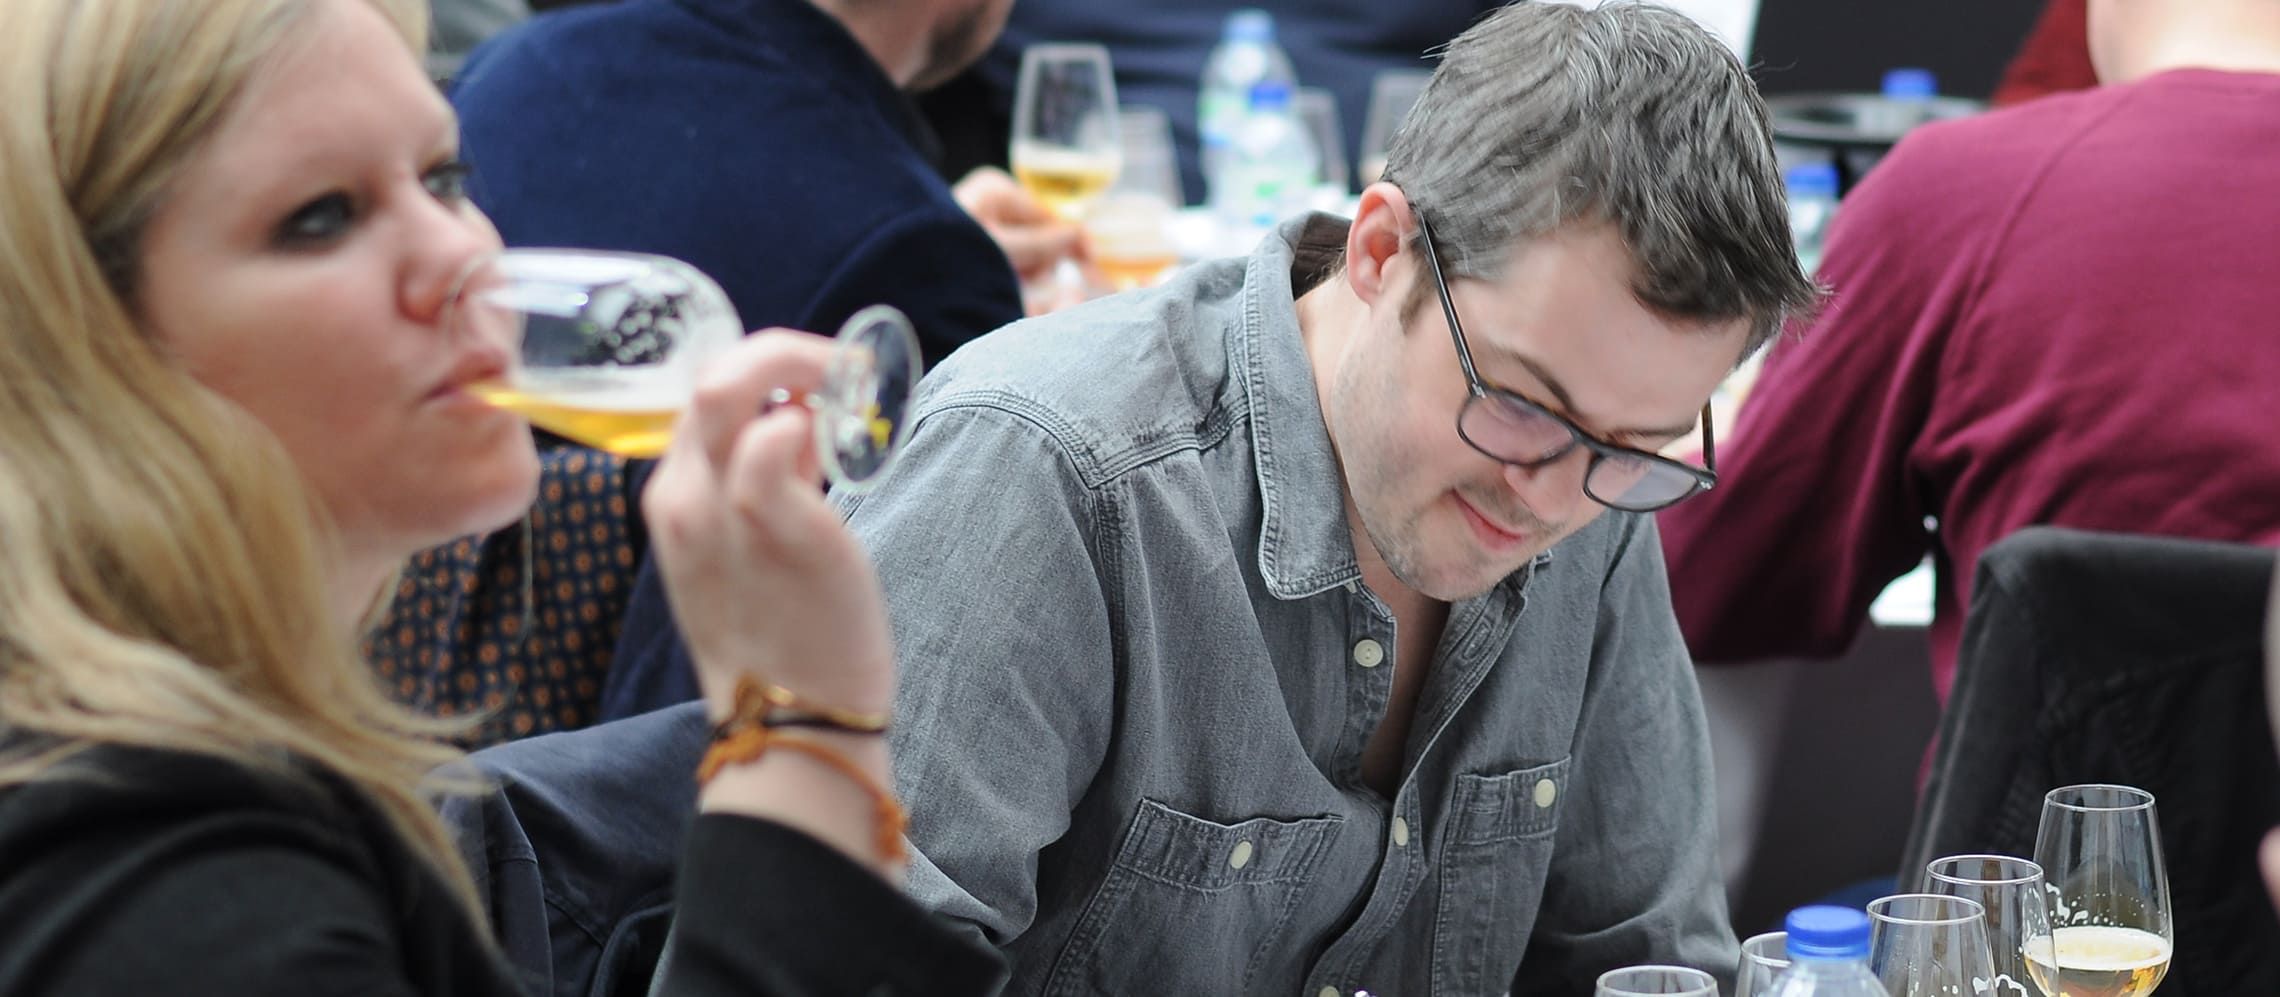 Photo for: Last Day To Enter Your Beer in the 2020 London Beer Competition